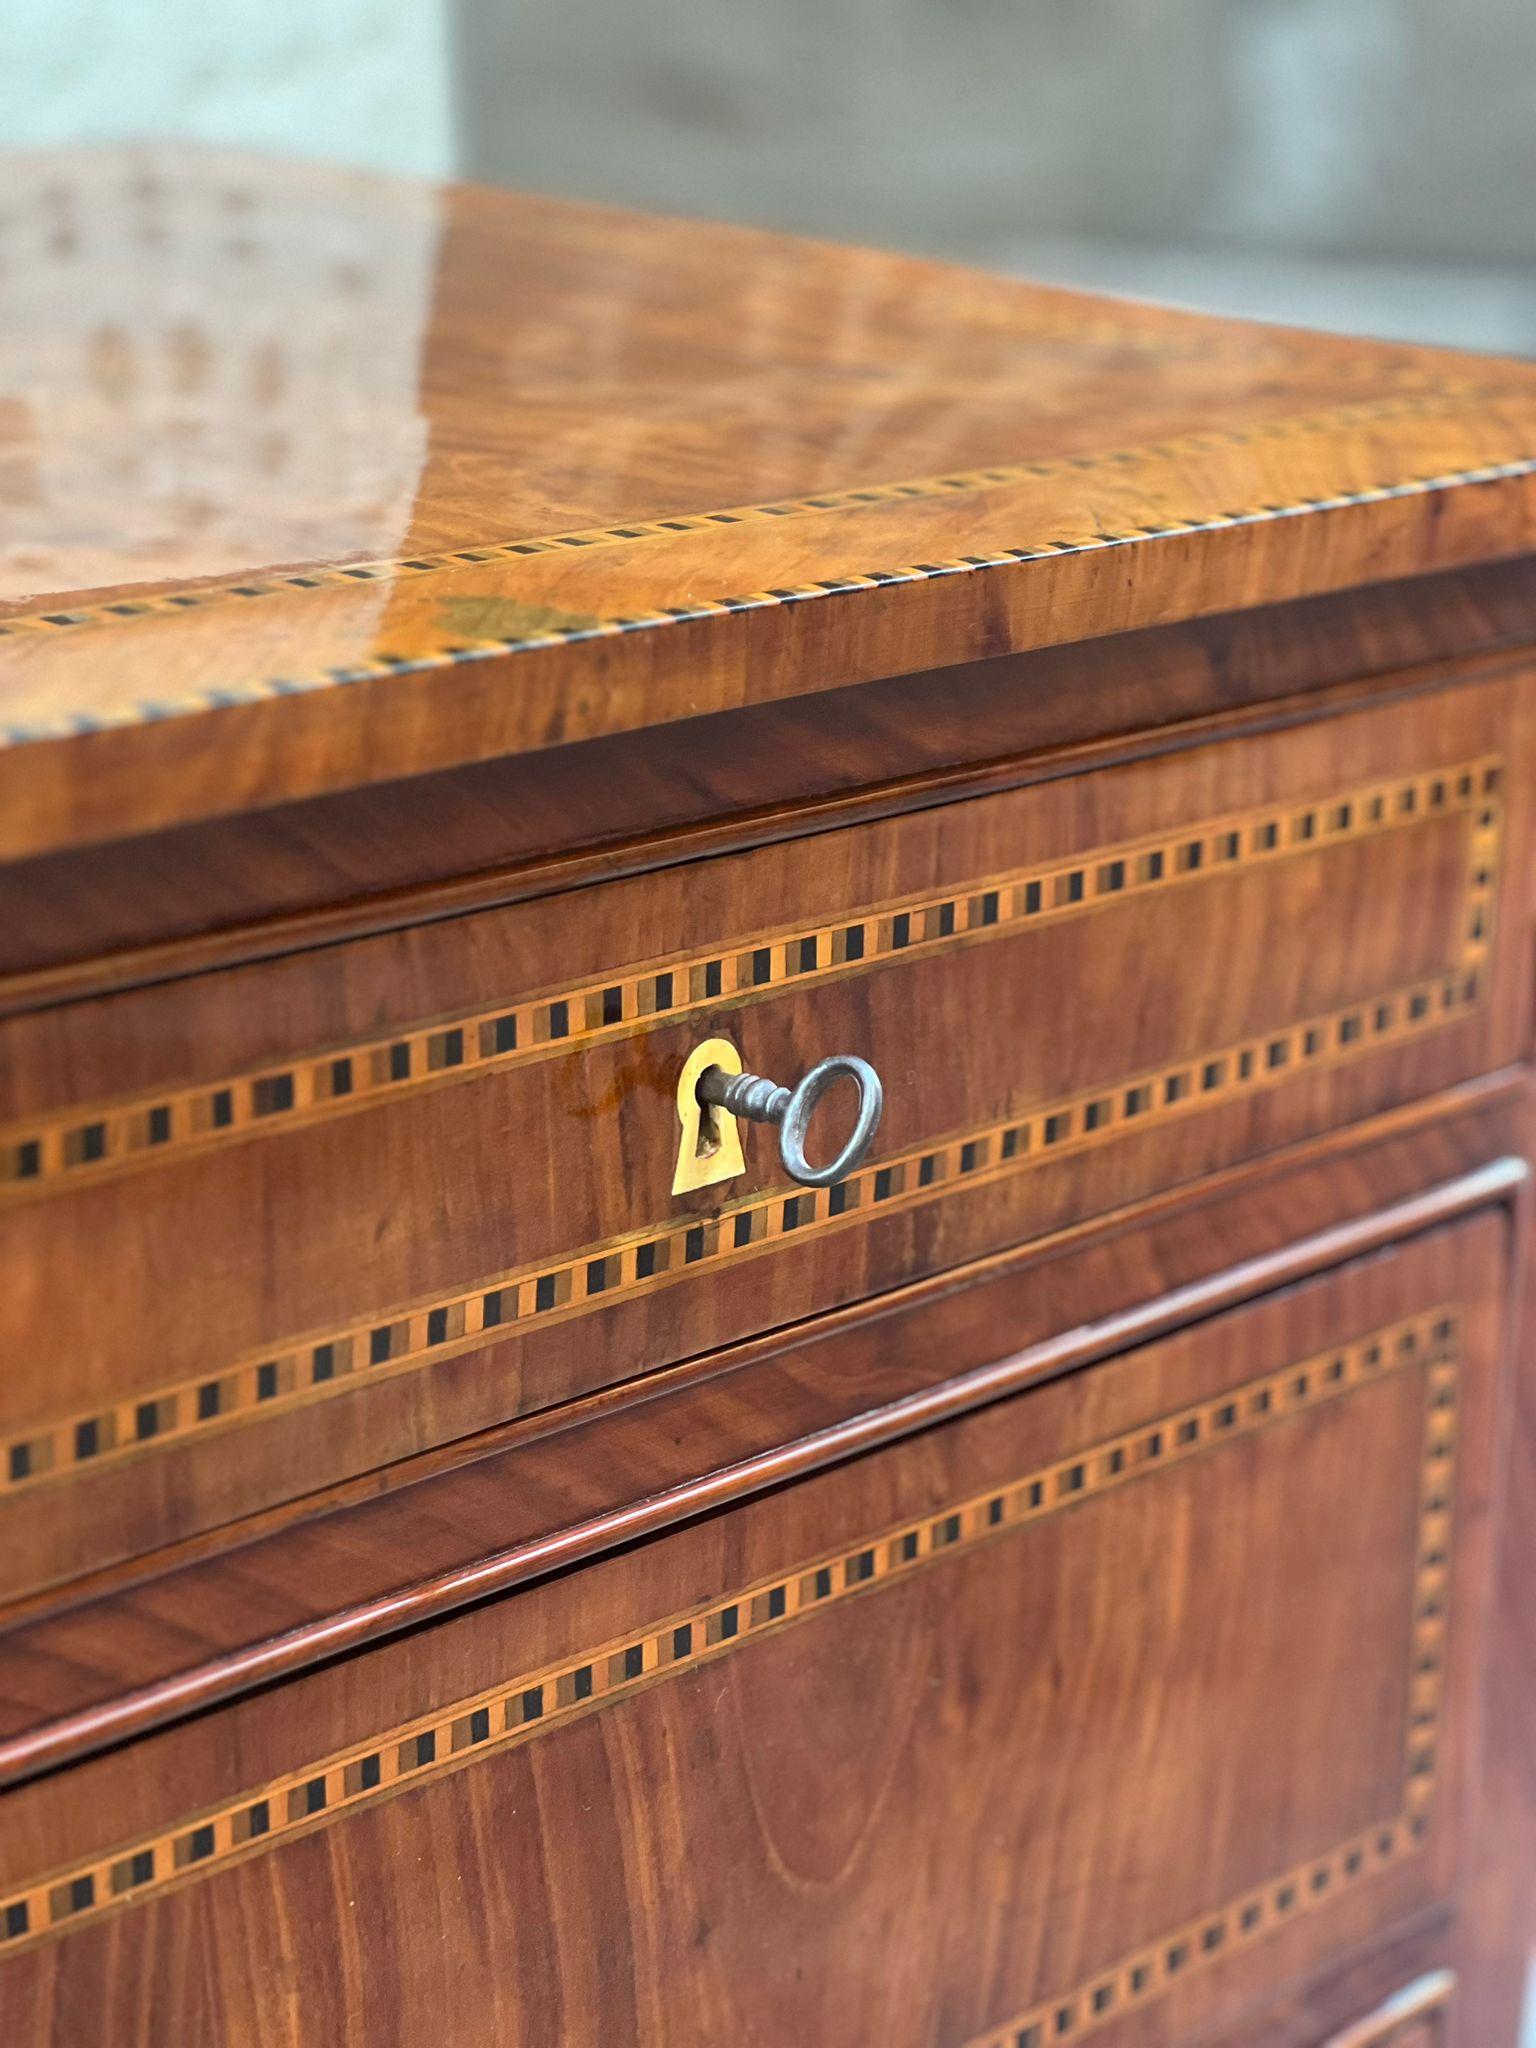 Elegant walnut chest of drawers threaded with 